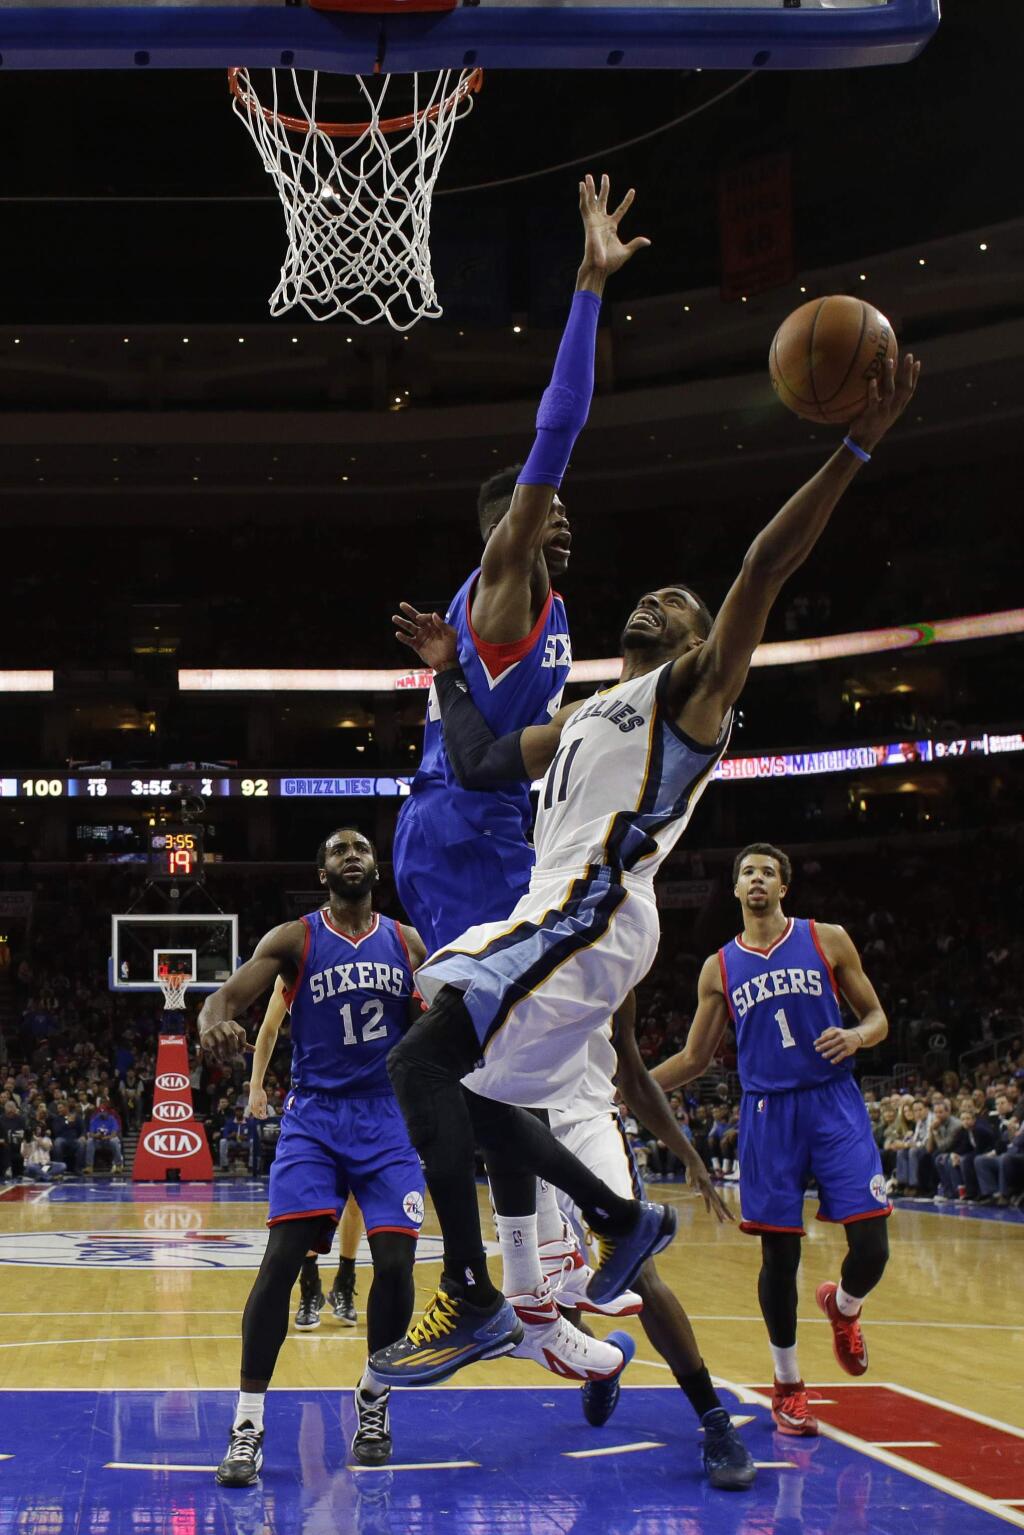 Memphis Grizzlies' Mike Conley (11) goes up for a shot against Philadelphia 76ers' Nerlens Noel during the second half of an NBA basketball game, Saturday, Dec. 13, 2014, in Philadelphia. Memphis won 120-115 in overtime. (AP Photo/Matt Slocum)